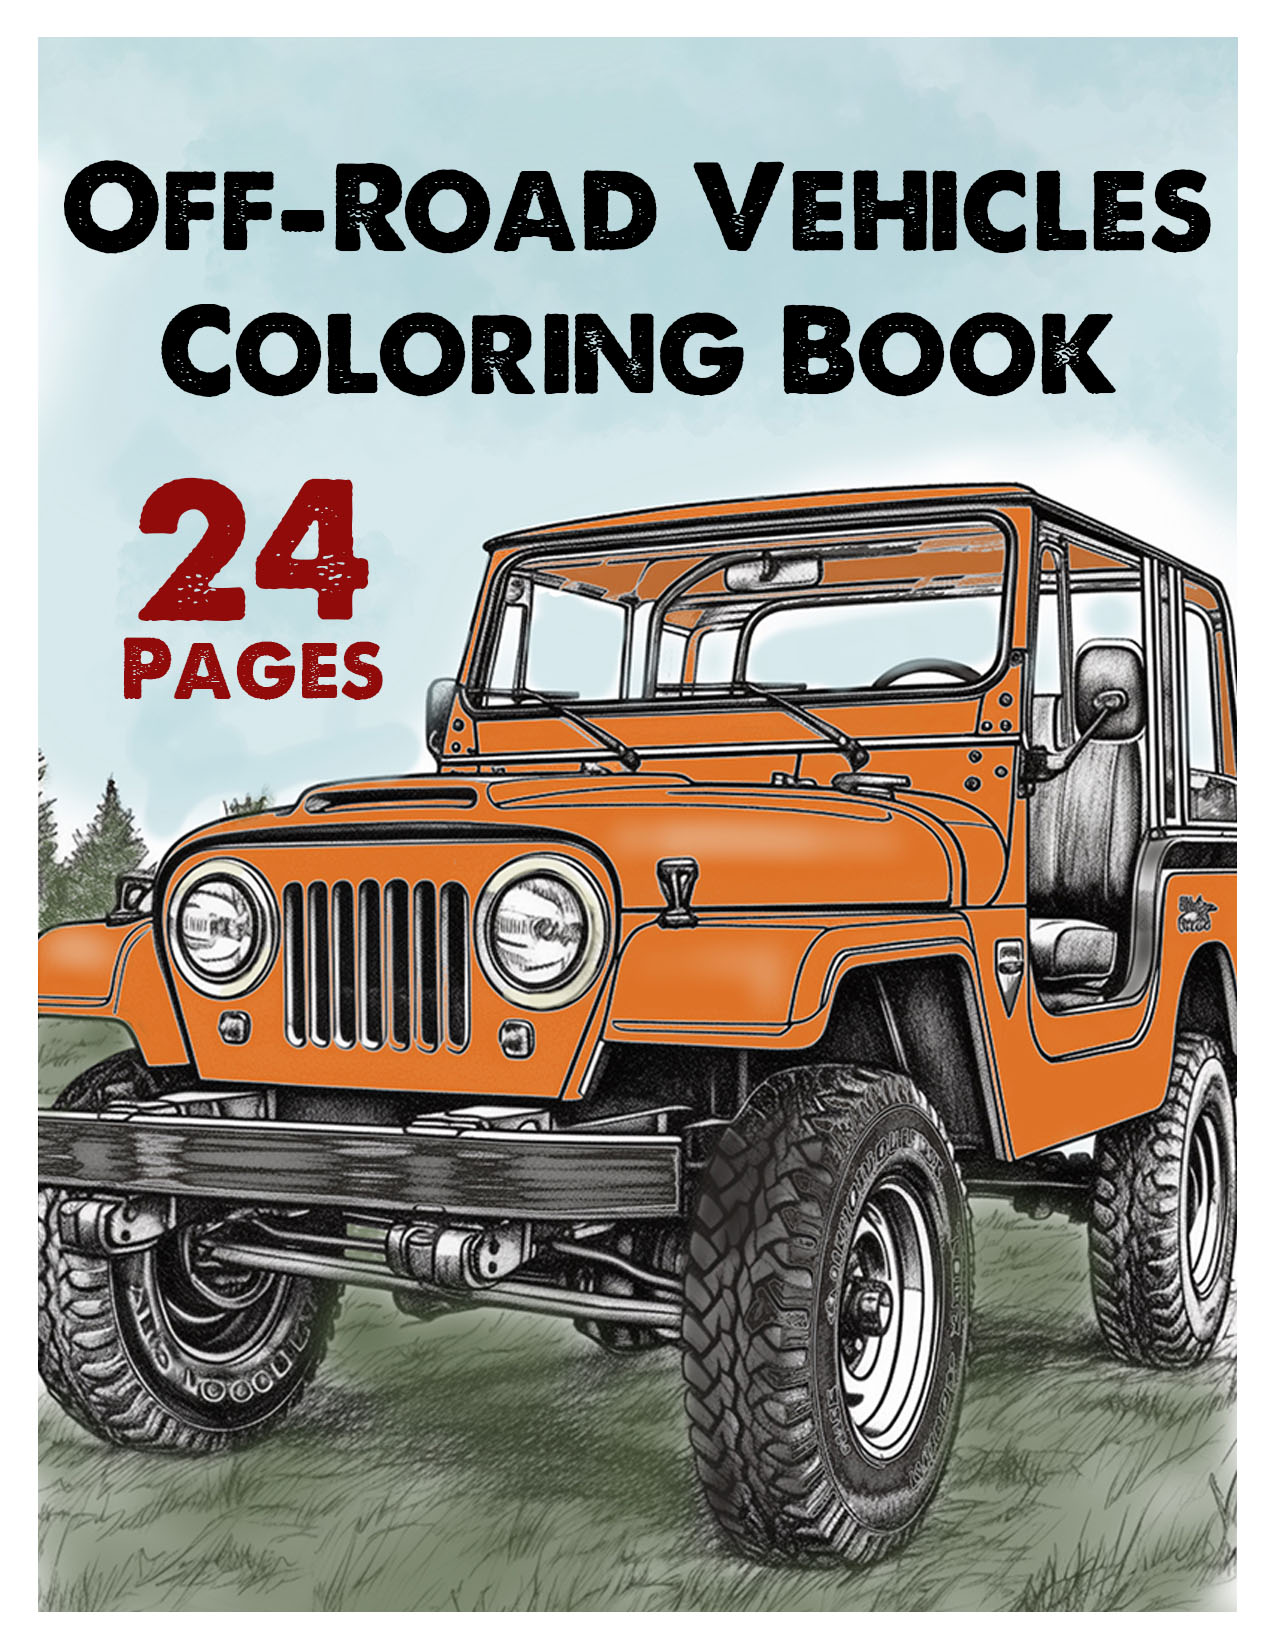 Off-Road Vehicles Coloring Book Cover